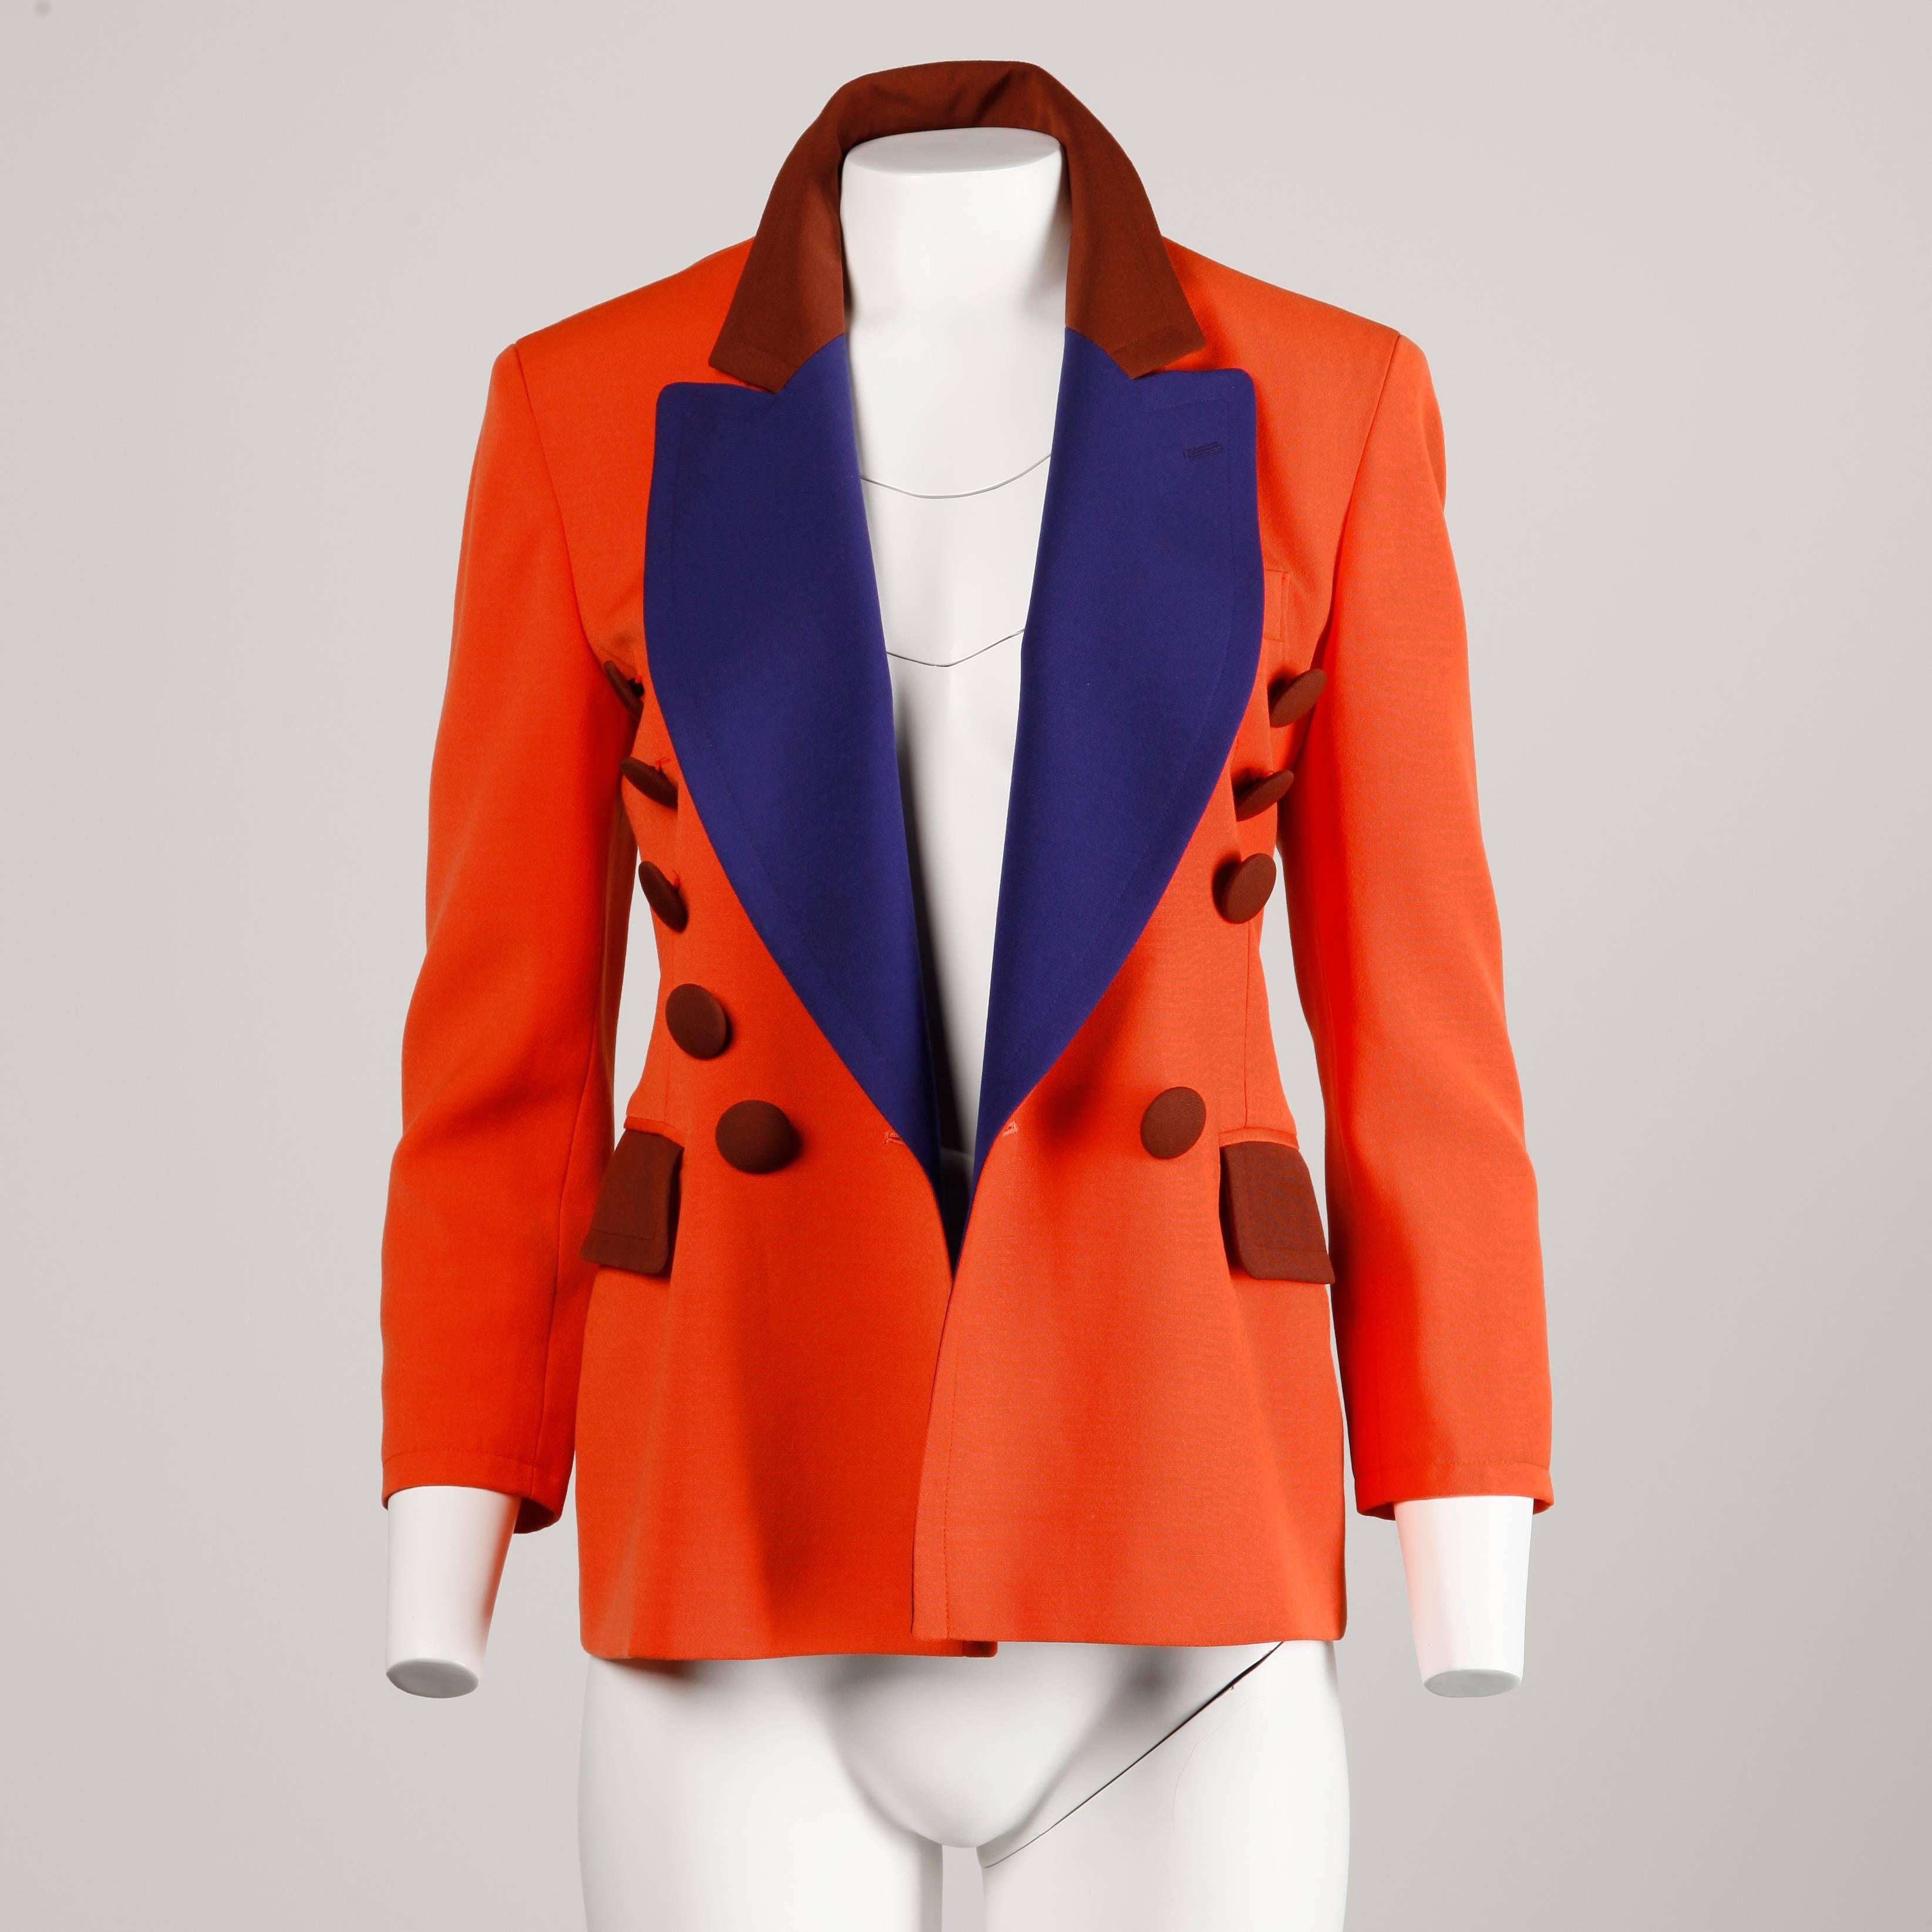 Vintage bright orange wool blazer jacket by Moschino Couture! with brown and blue buttons and lapels. Rare Franco Moschino pre-death design dates to the late 80s/ early 90s.

Details: 

Fully Lined
Front Placket Pockets
Marked Size: I 38/ D